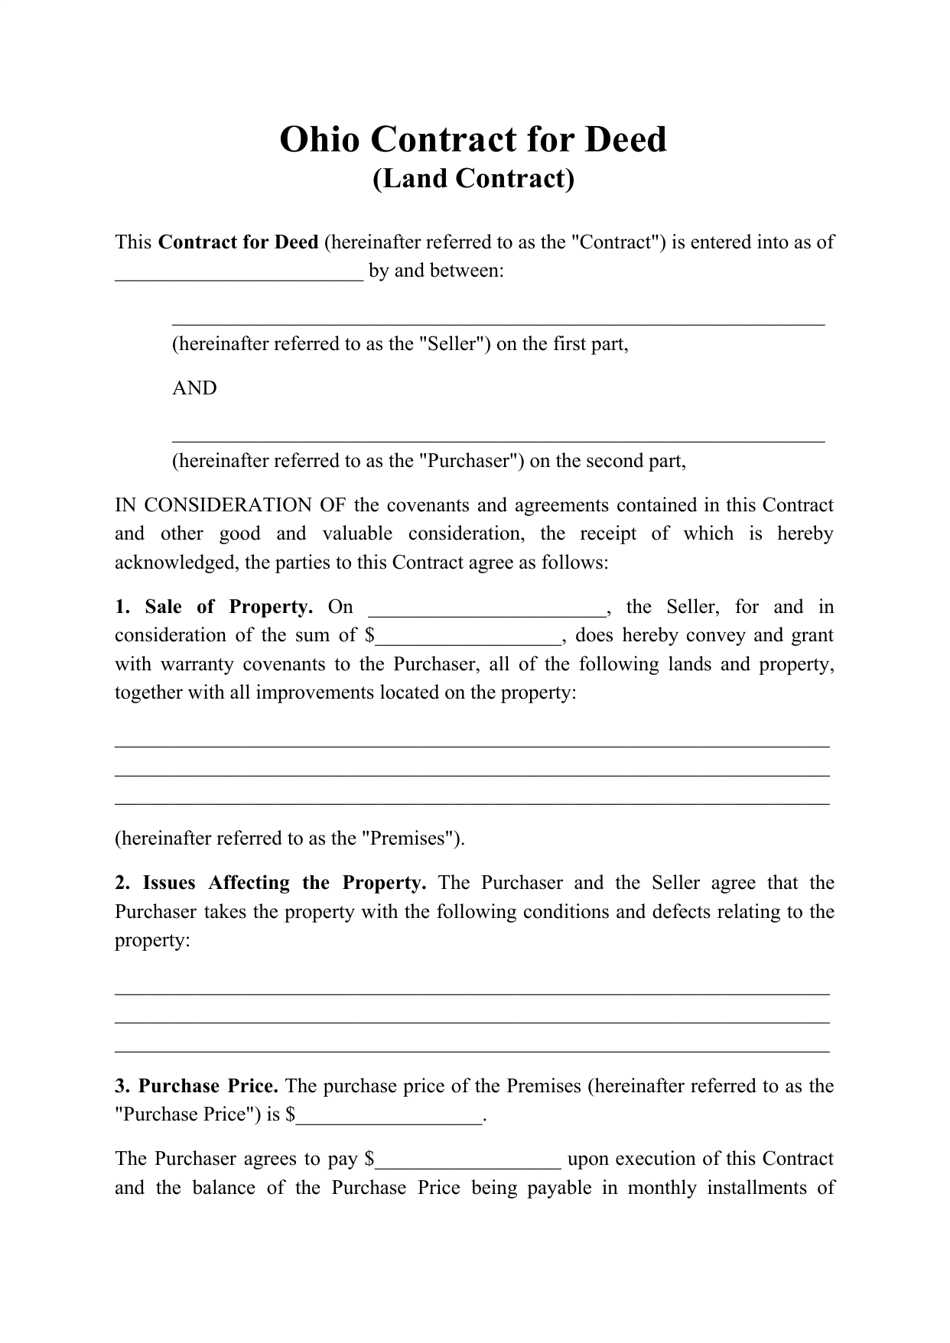 Ohio Contract For Deed Land Contract Download Printable Pdf Templateroller